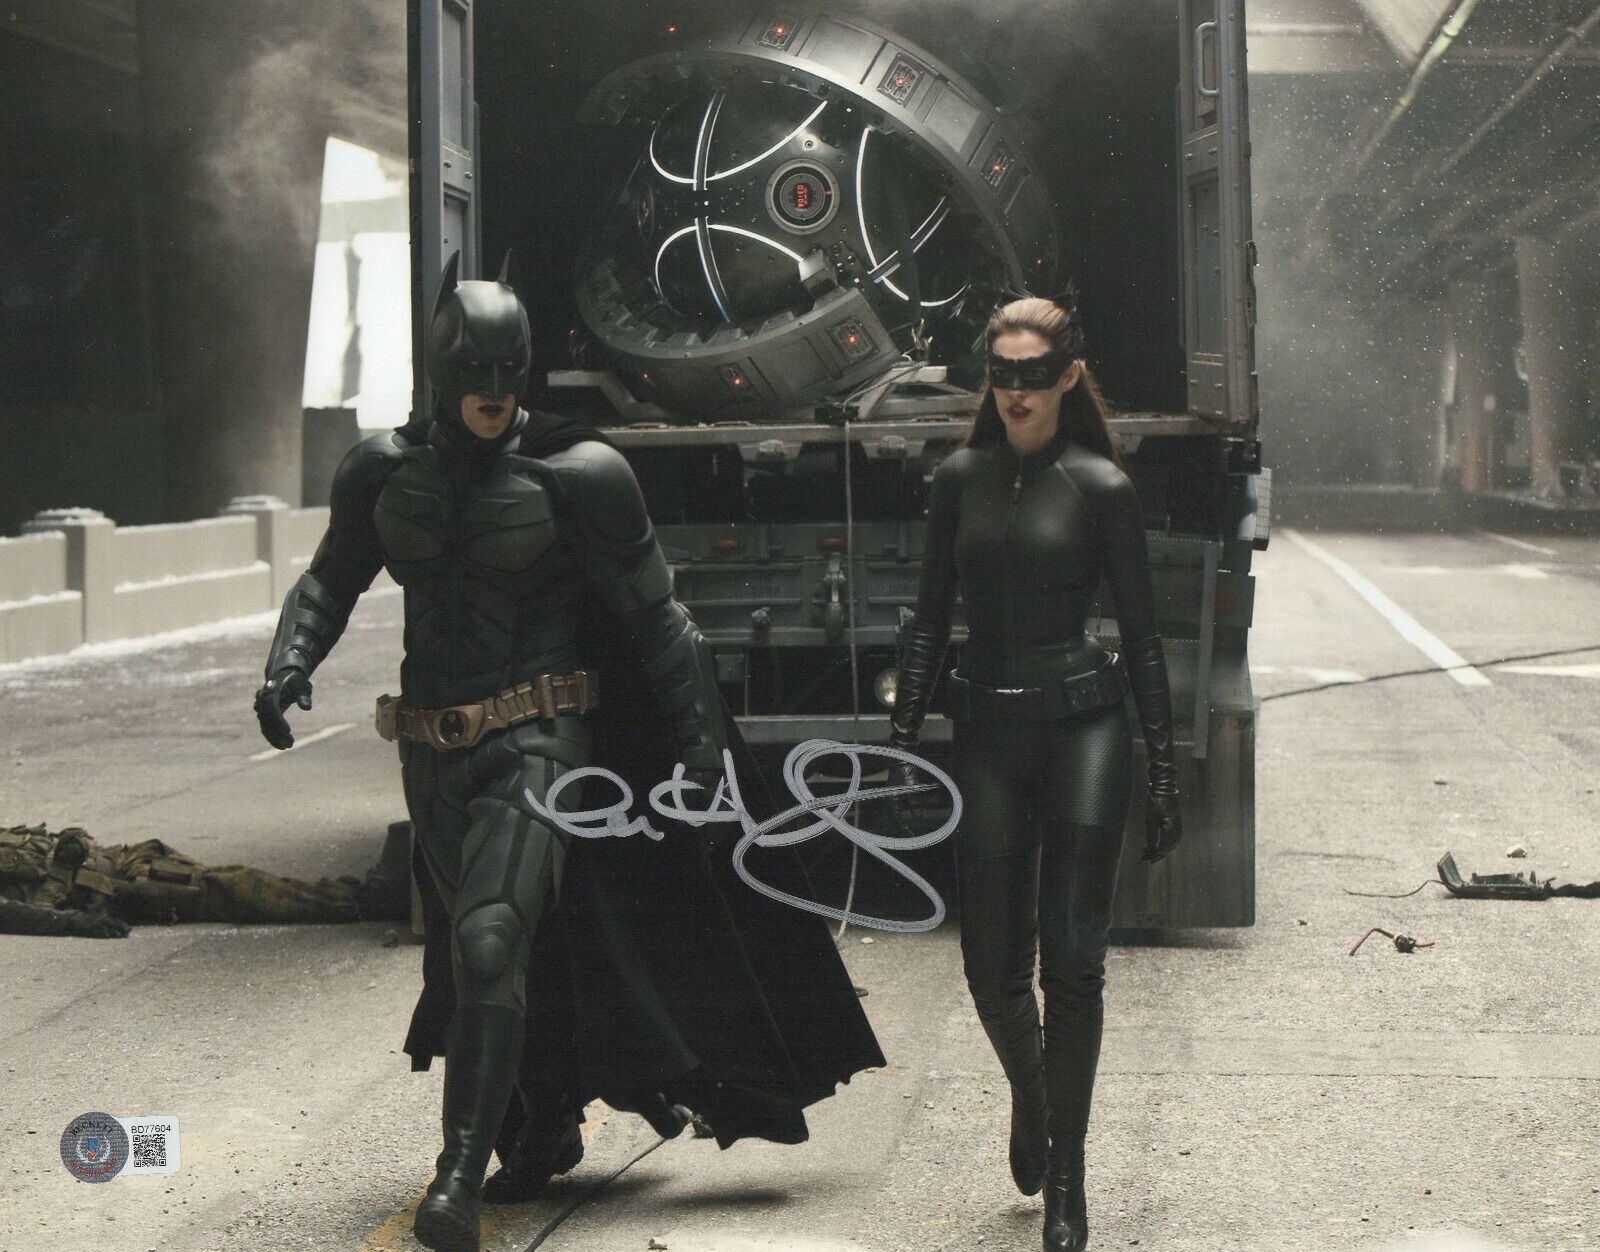 ANNE HATHAWAY SIGNED AUTOGRAPH THE DARK KNIGHT RISES 11X14 PHOTO BAS BECKETT